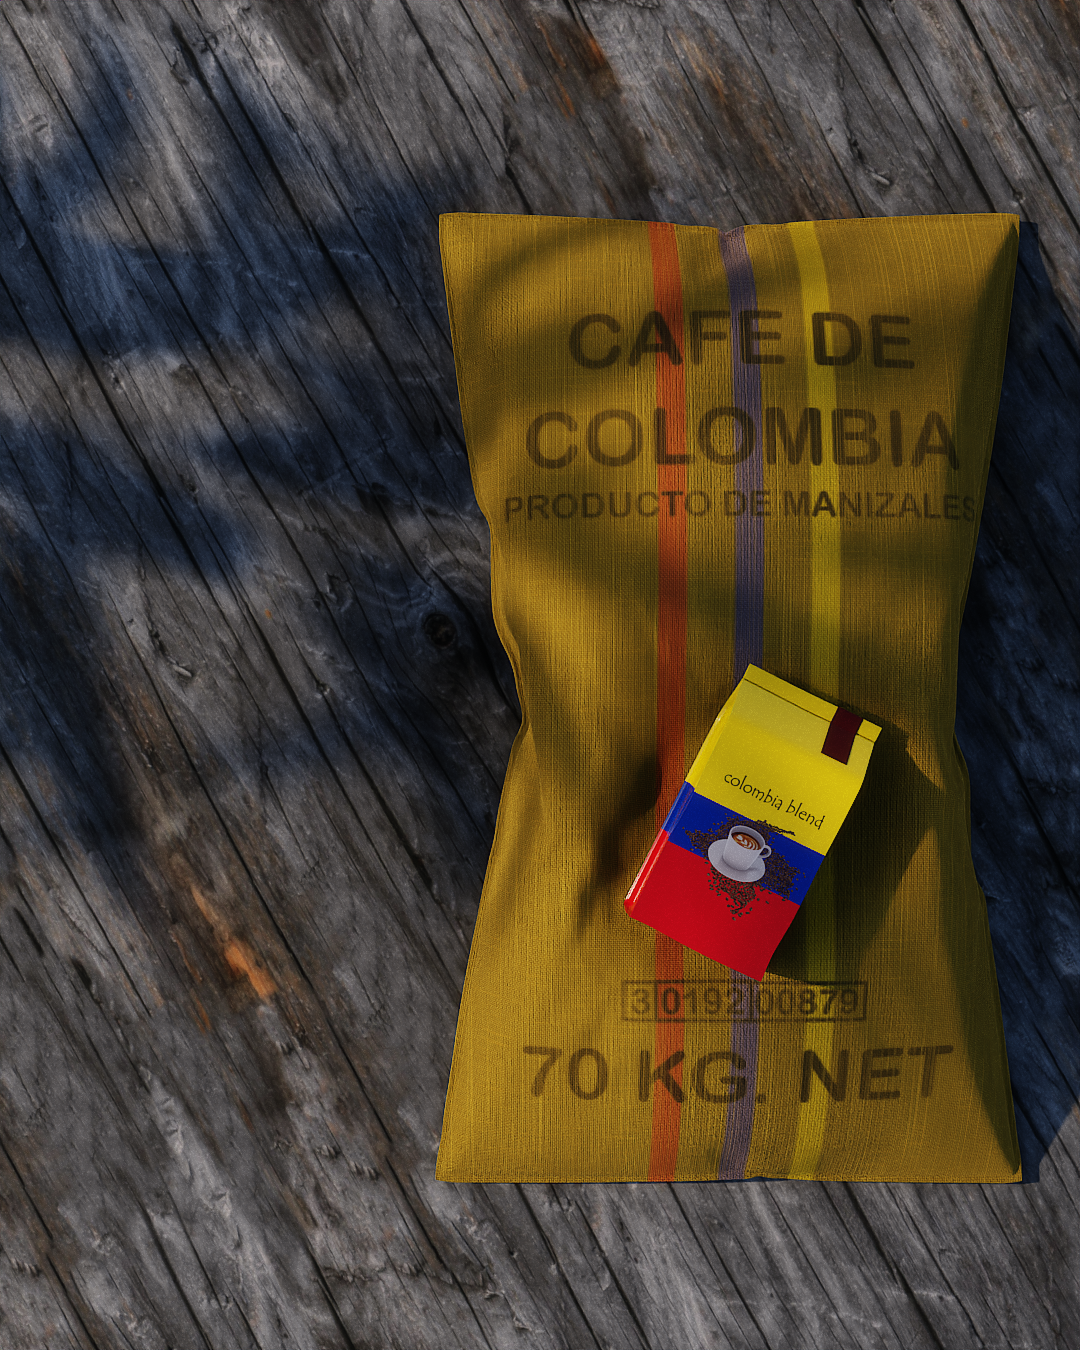 Photorealistic render of a burlap sack of coffee with the finished product packaging sitting on top of it as a marketing visual
using cgi product photography.